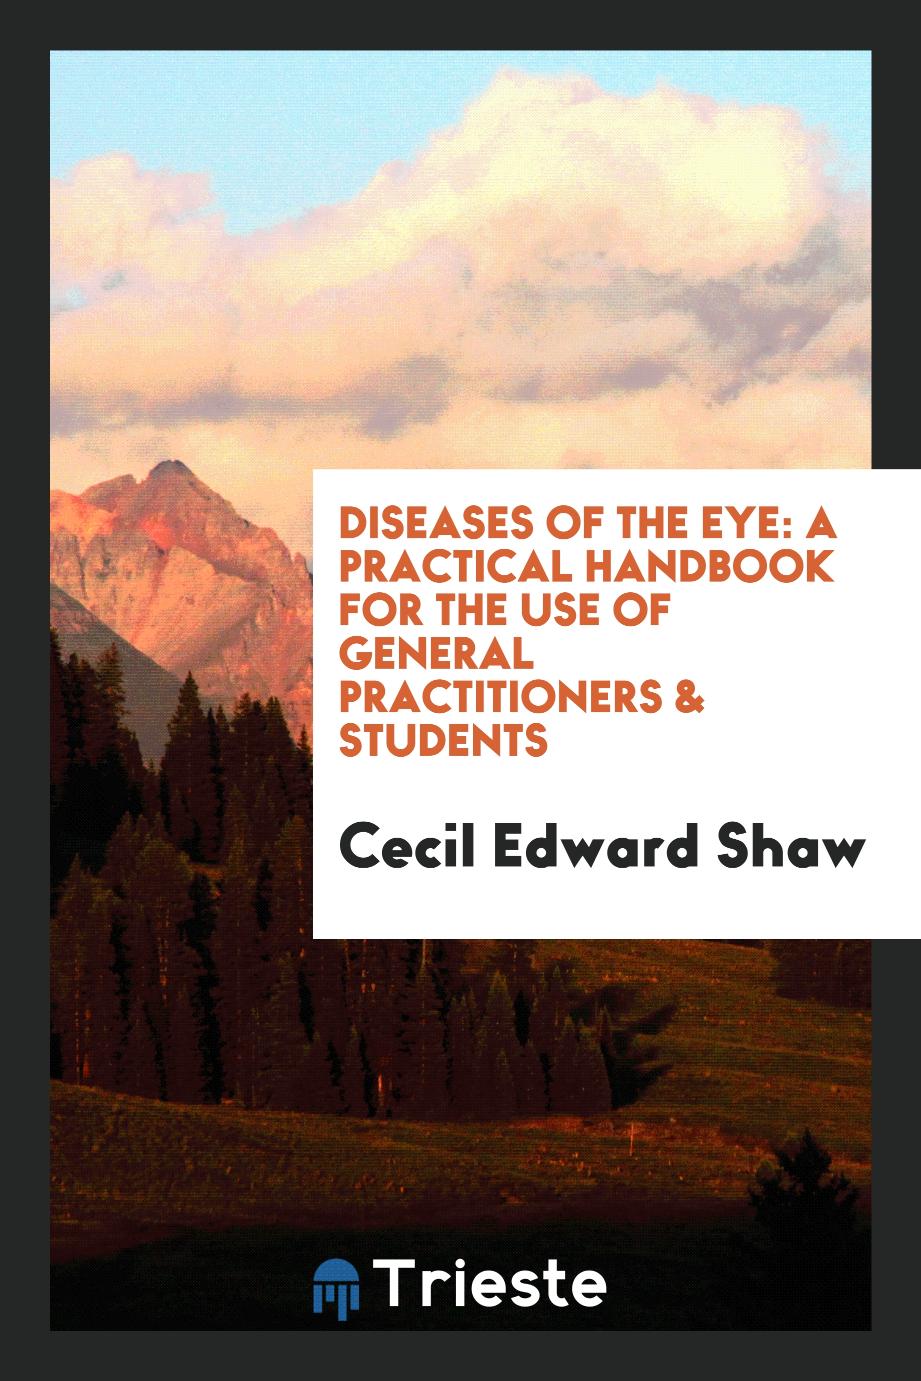 Diseases of the Eye: A Practical Handbook for the Use of General Practitioners & Students